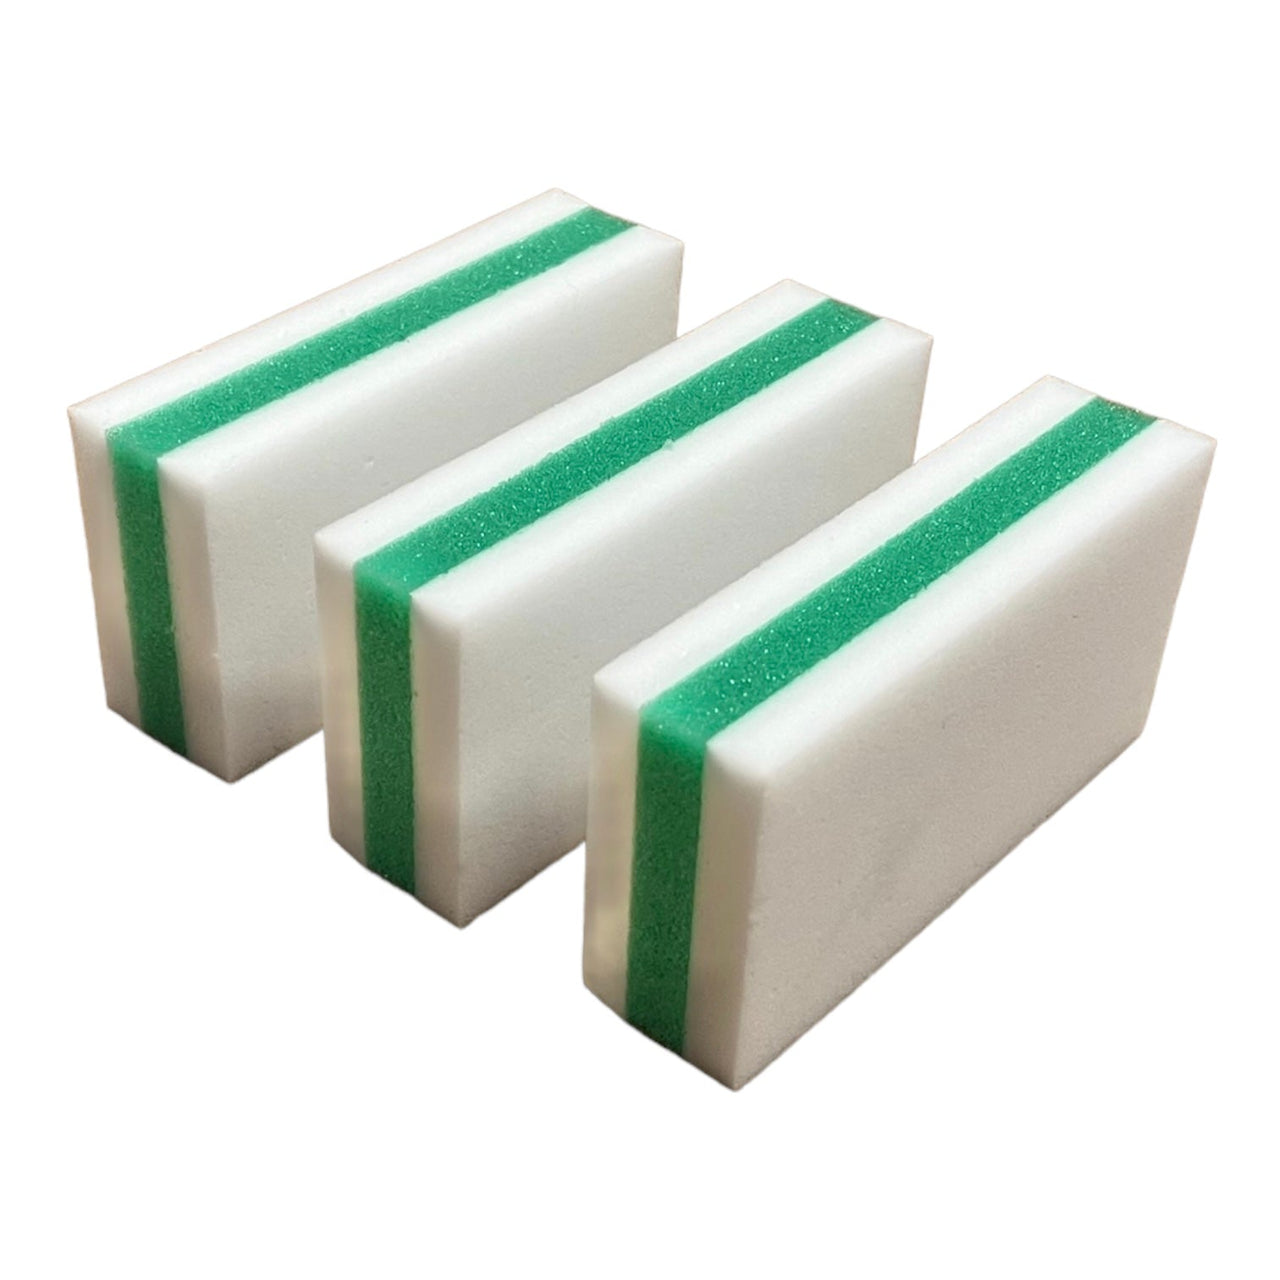 Premium Eraser Detailing Sponges - No Chemicals - Made in the USA - Double Sided with Poly Core  - Sold in Packs of 3